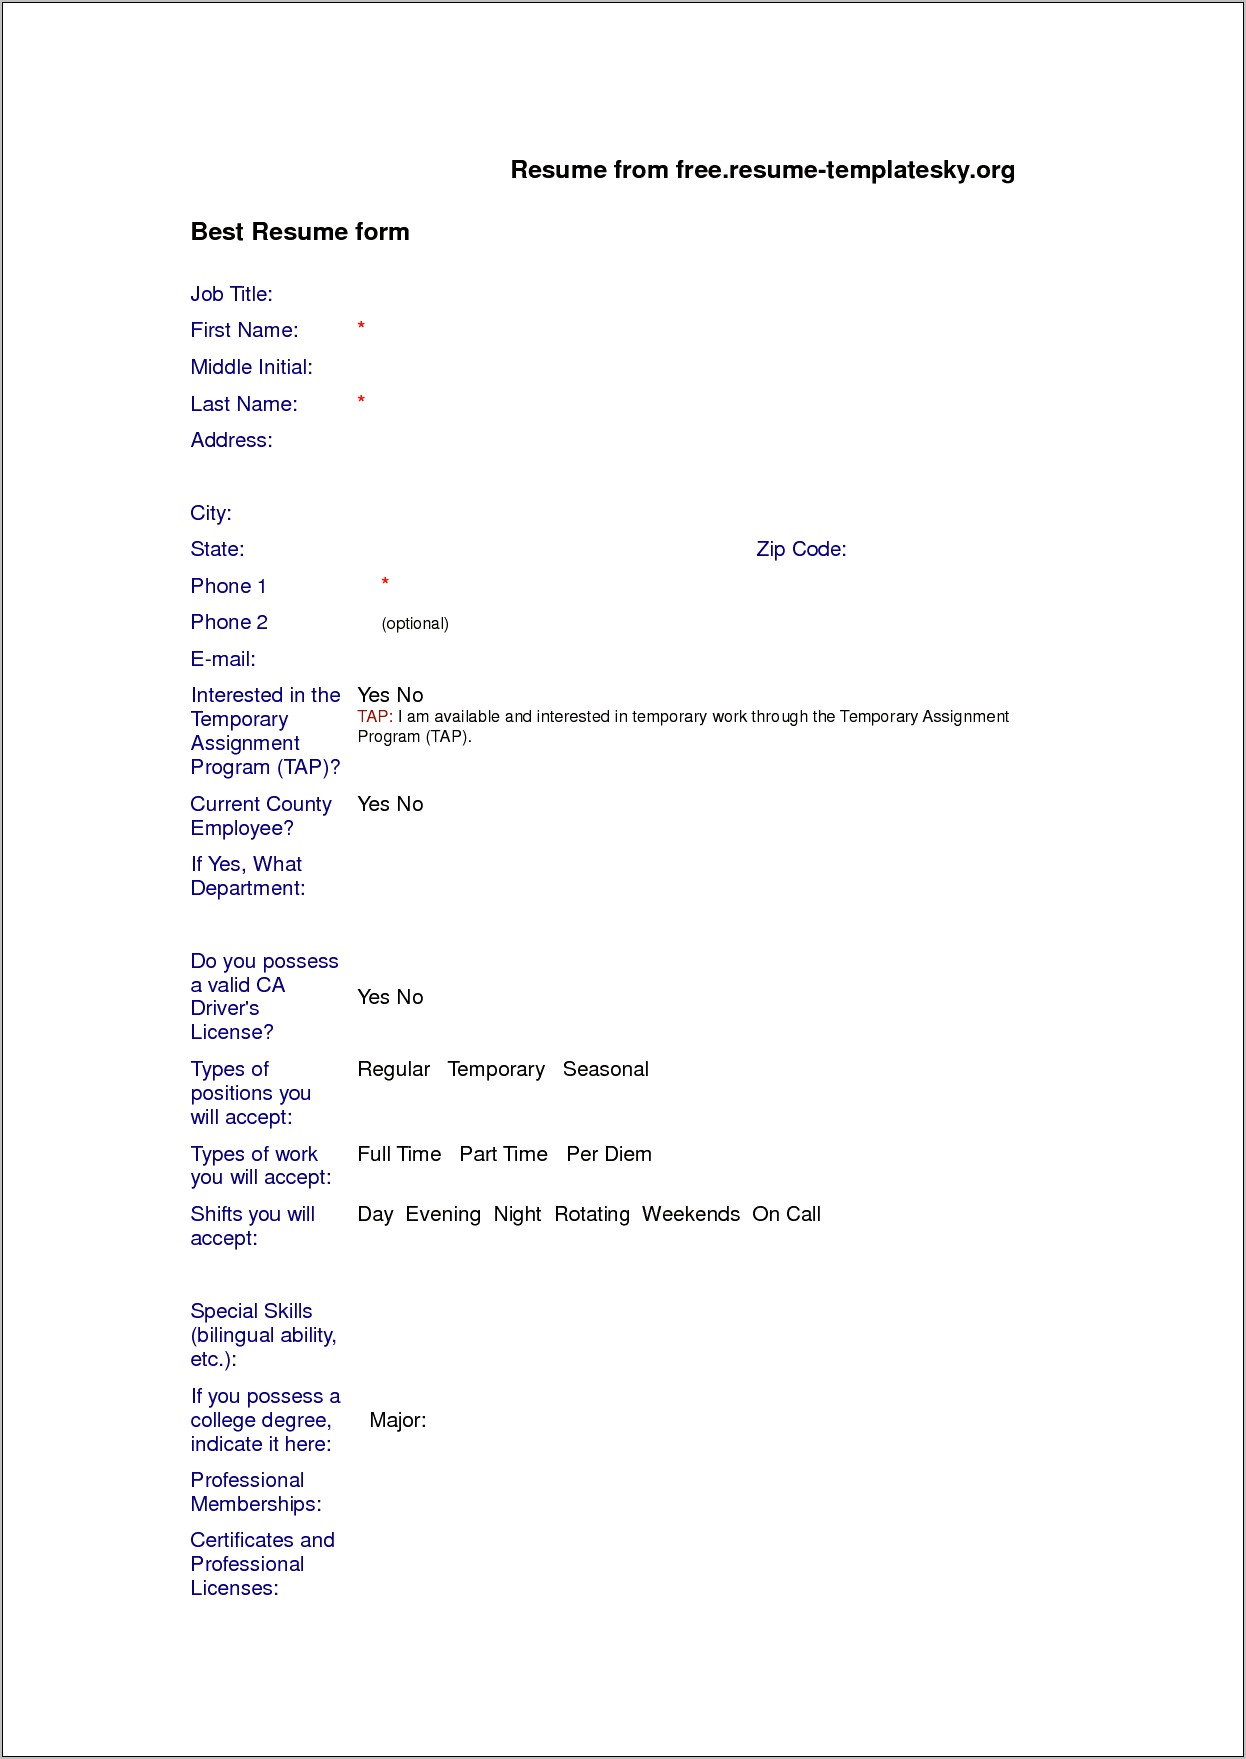 Best Resume With The Photo Download